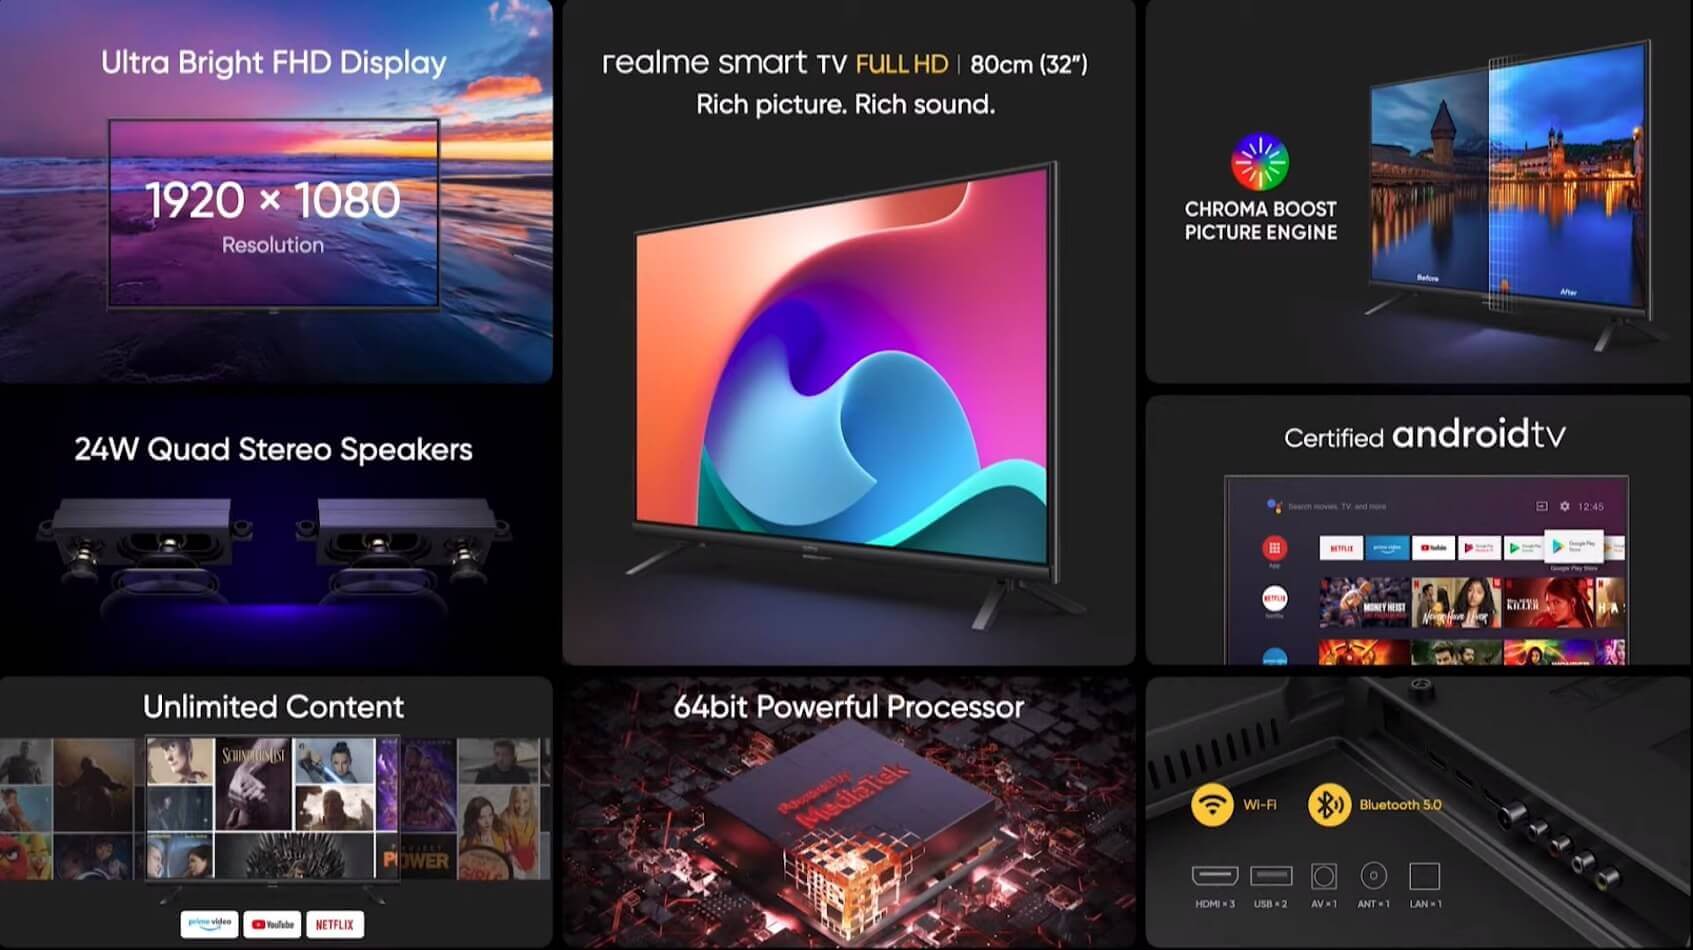 Realme Smart TV Full HD 32 inch features